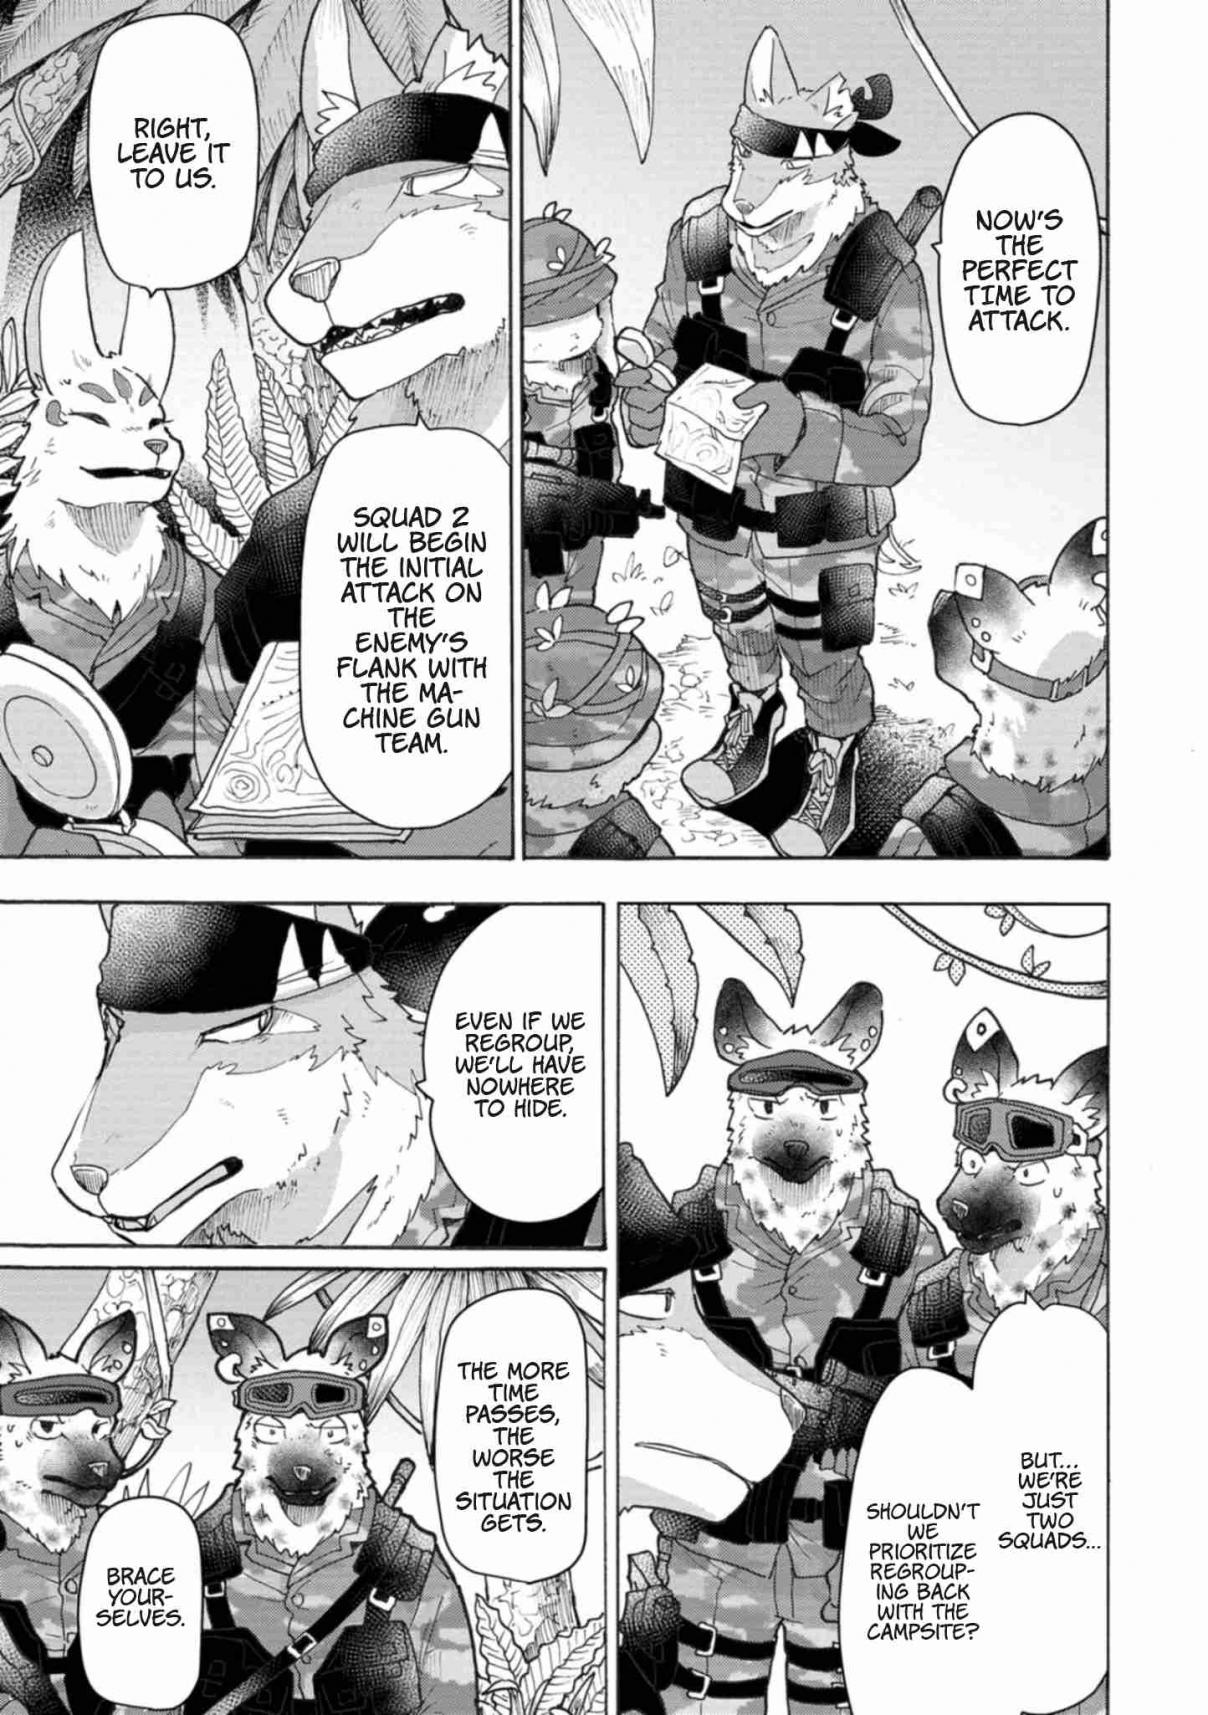 The Wolf Child Sora in the War Zone Vol. 1 Ch. 5 The Deadliest Sniper